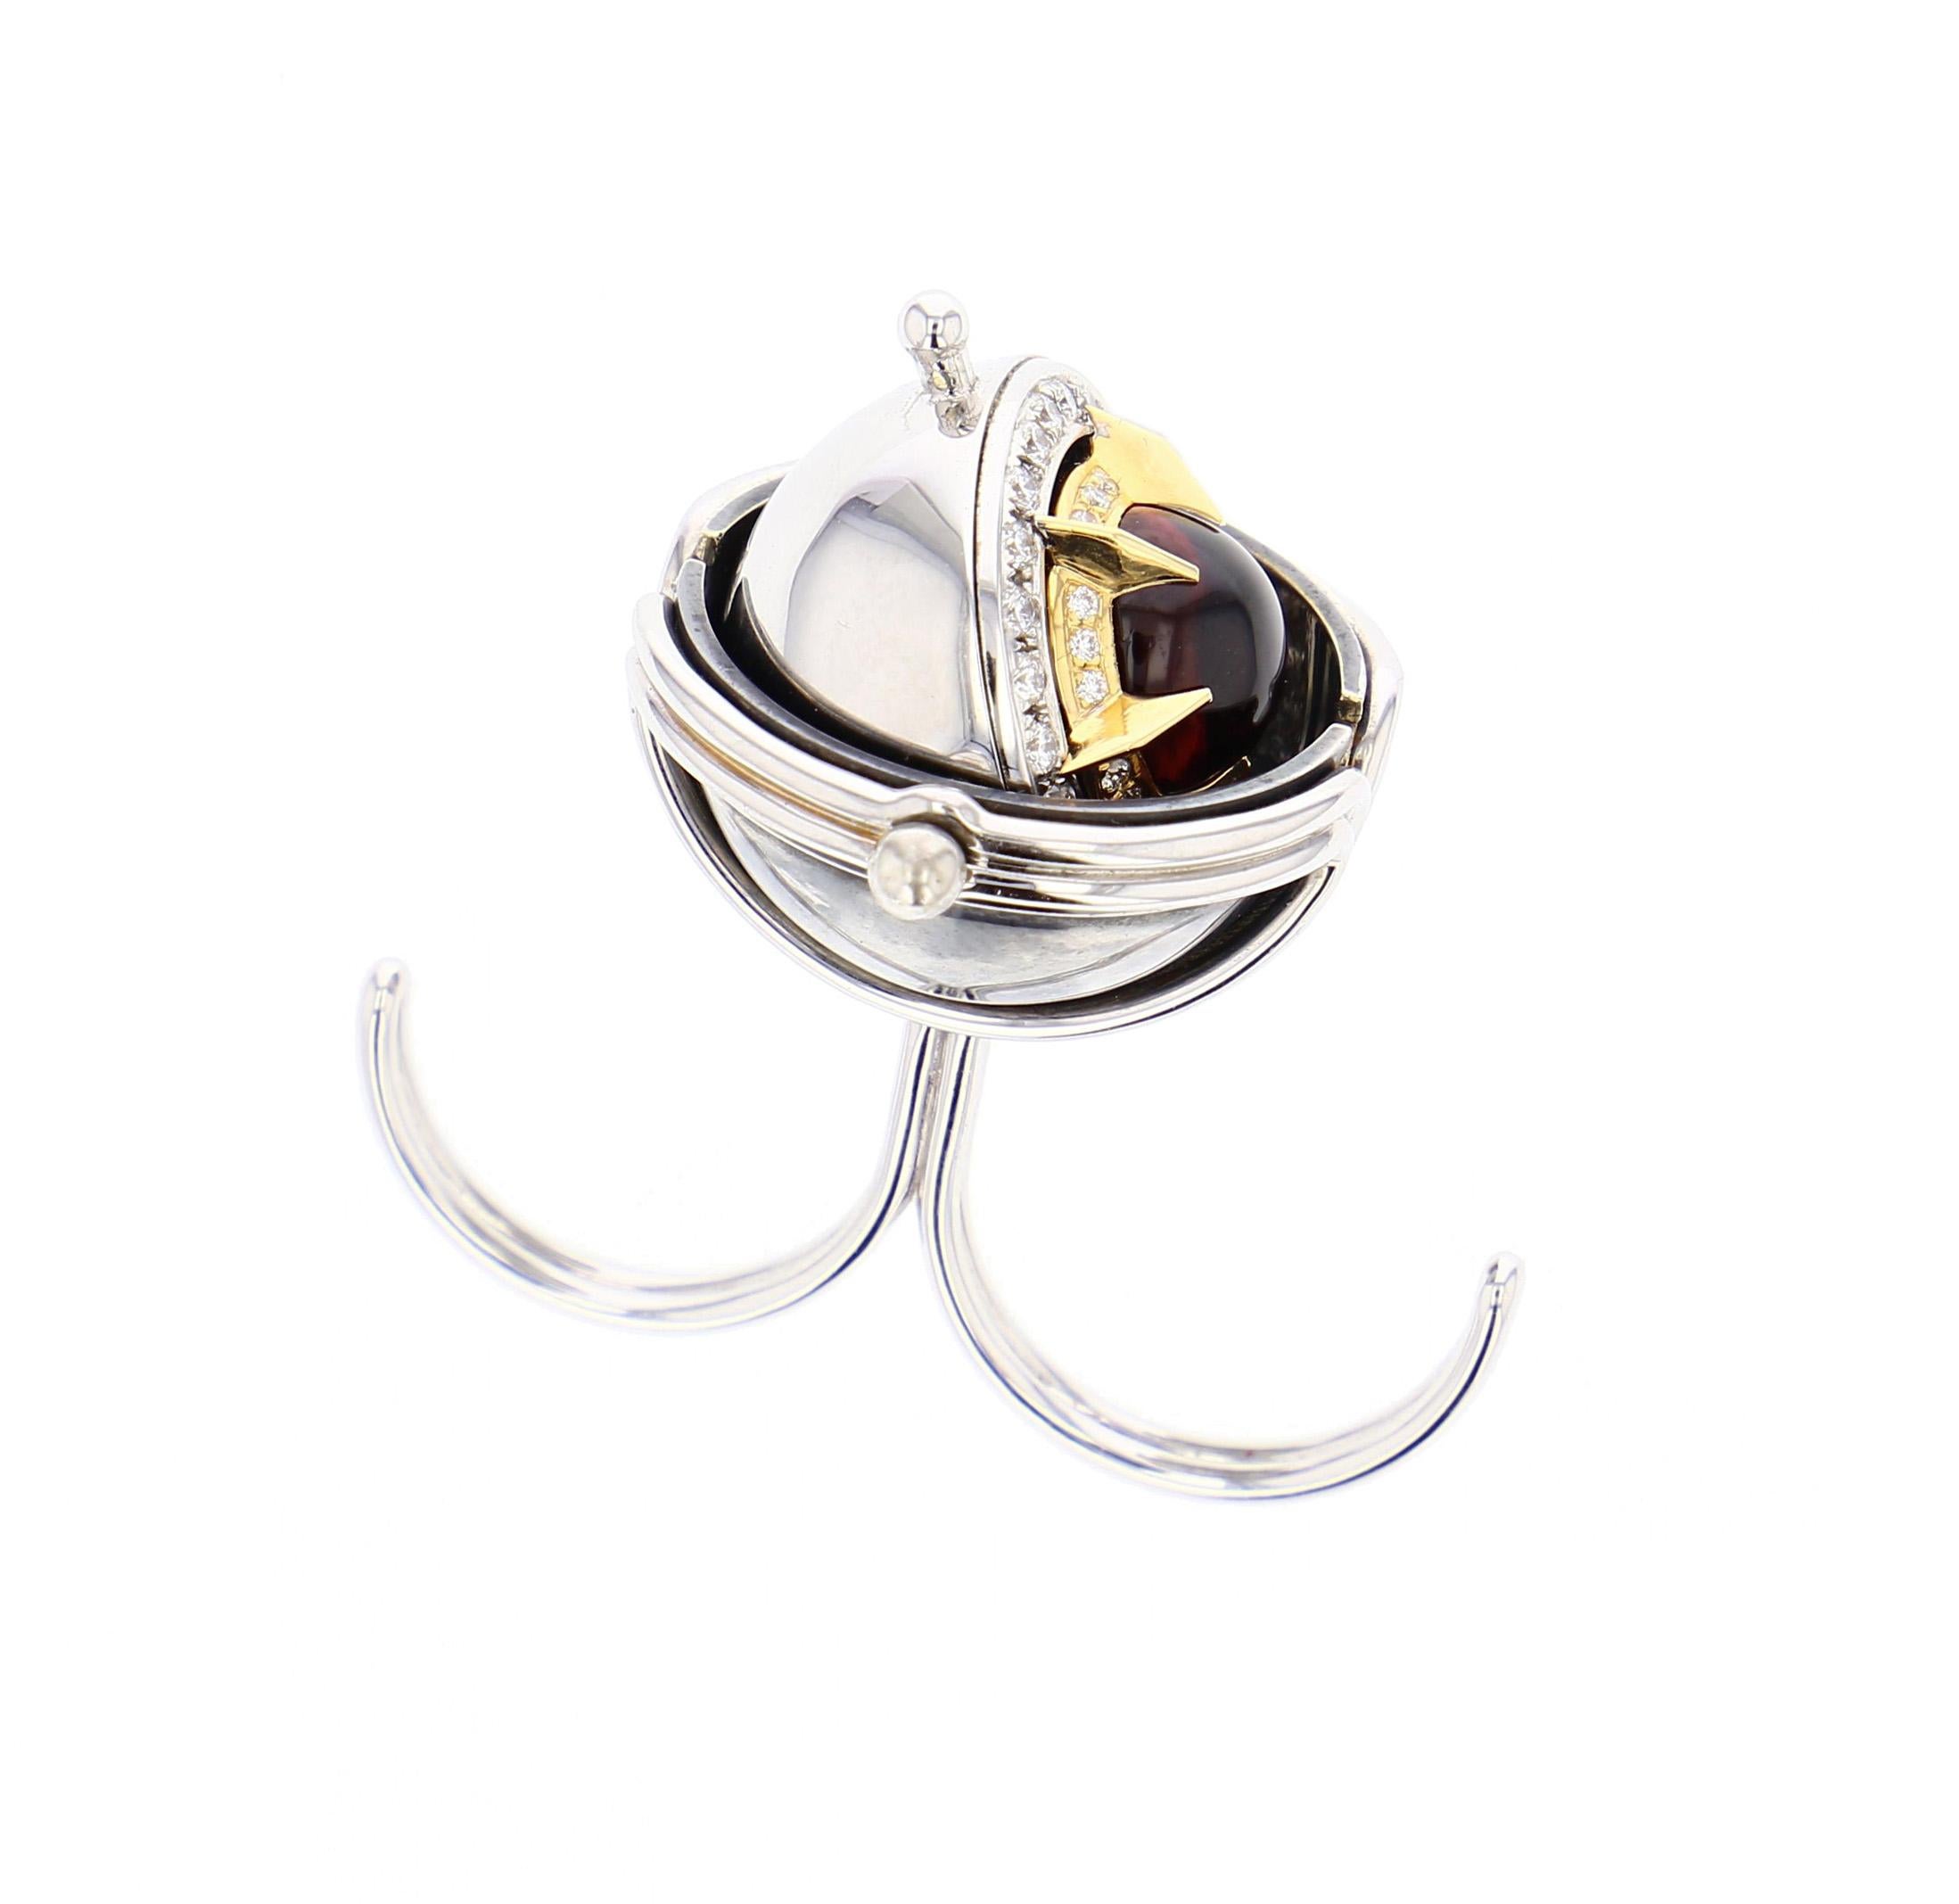 Neoclassical Pluton Double Ring Tourmaline by Elie Top